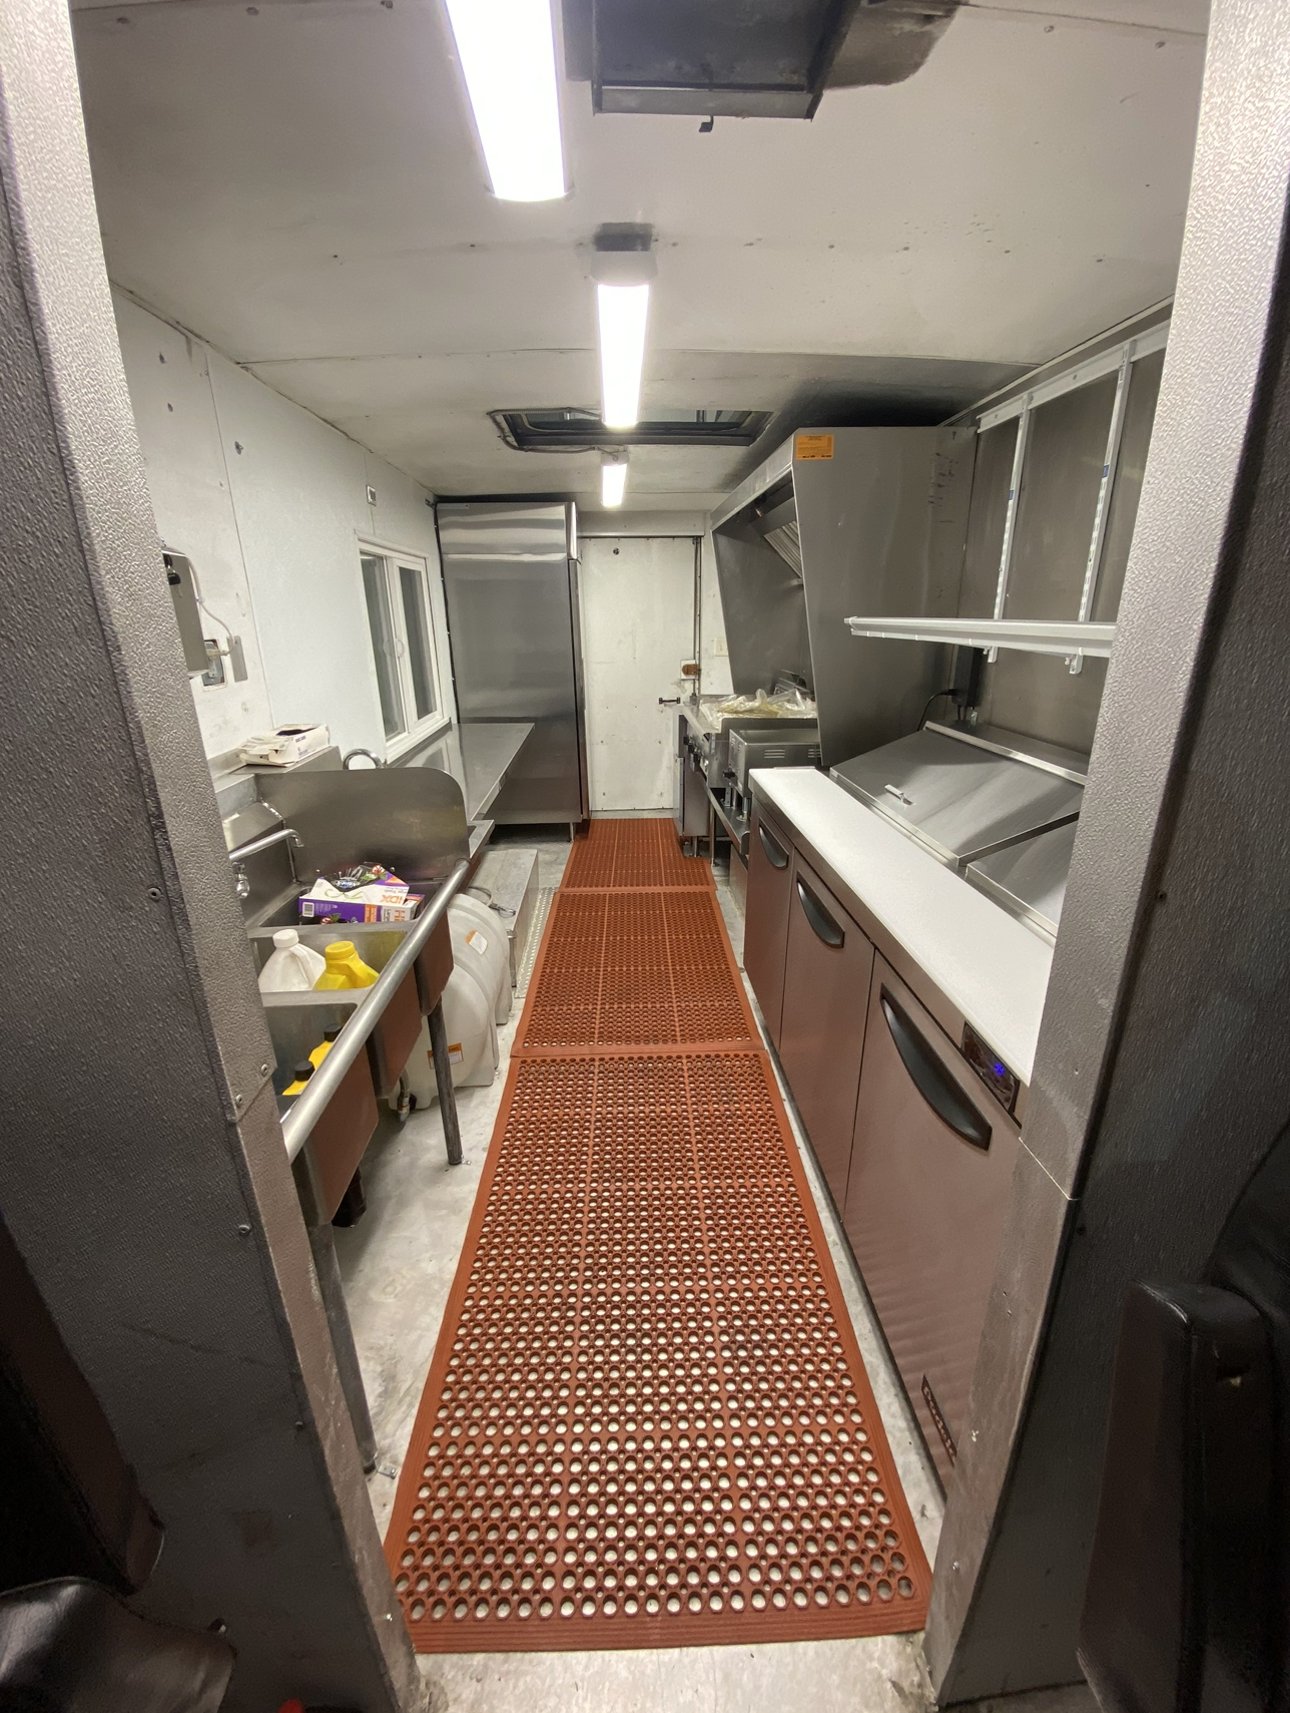  Photo:  Interior view of food truck.  